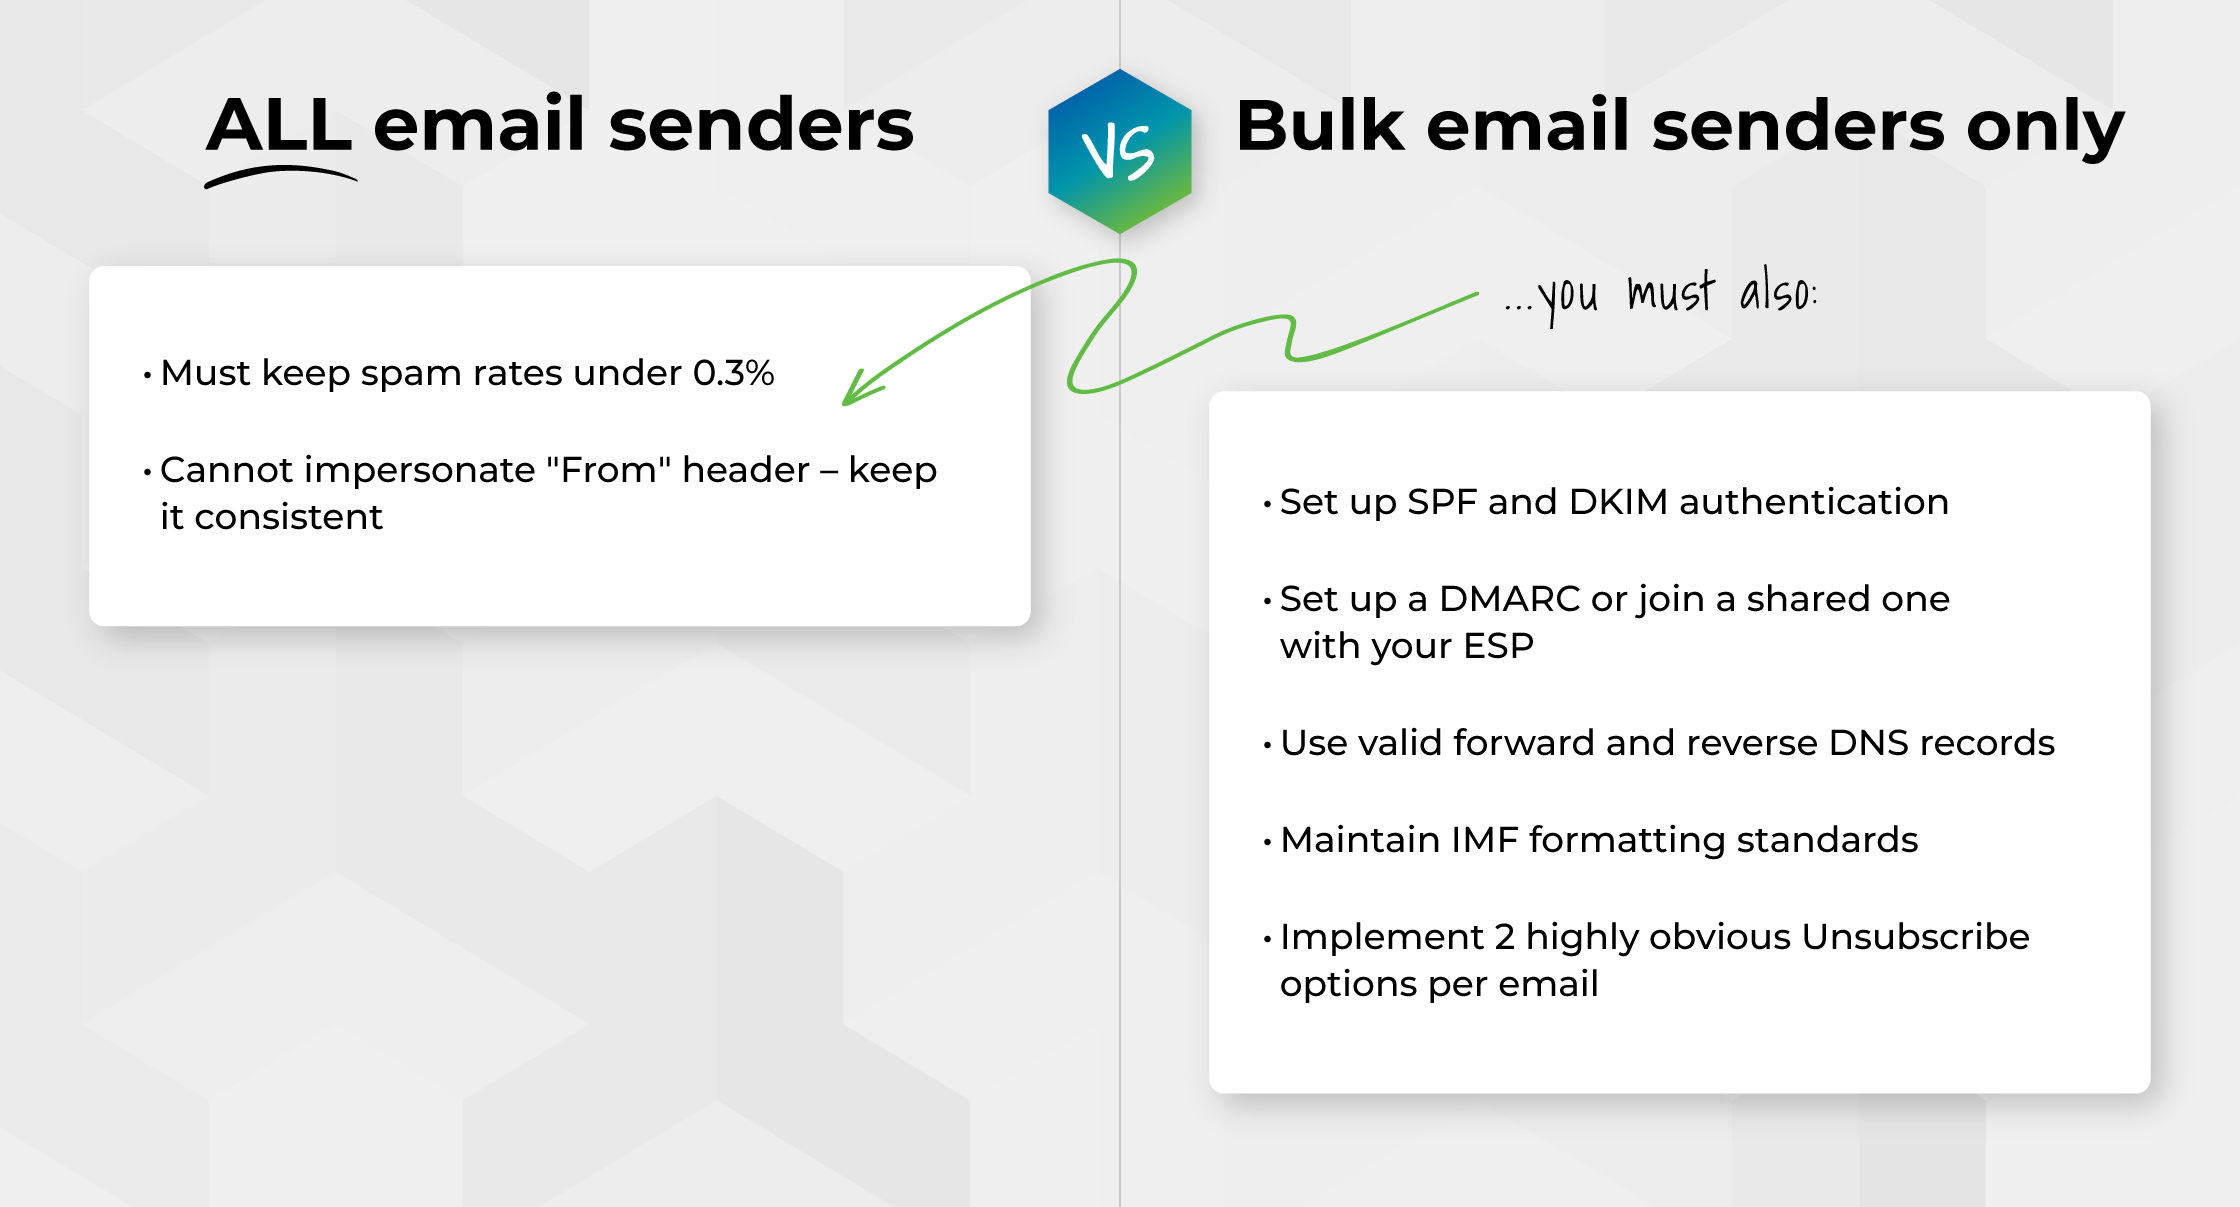 Requirements for all email senders vs. bulk email senders only